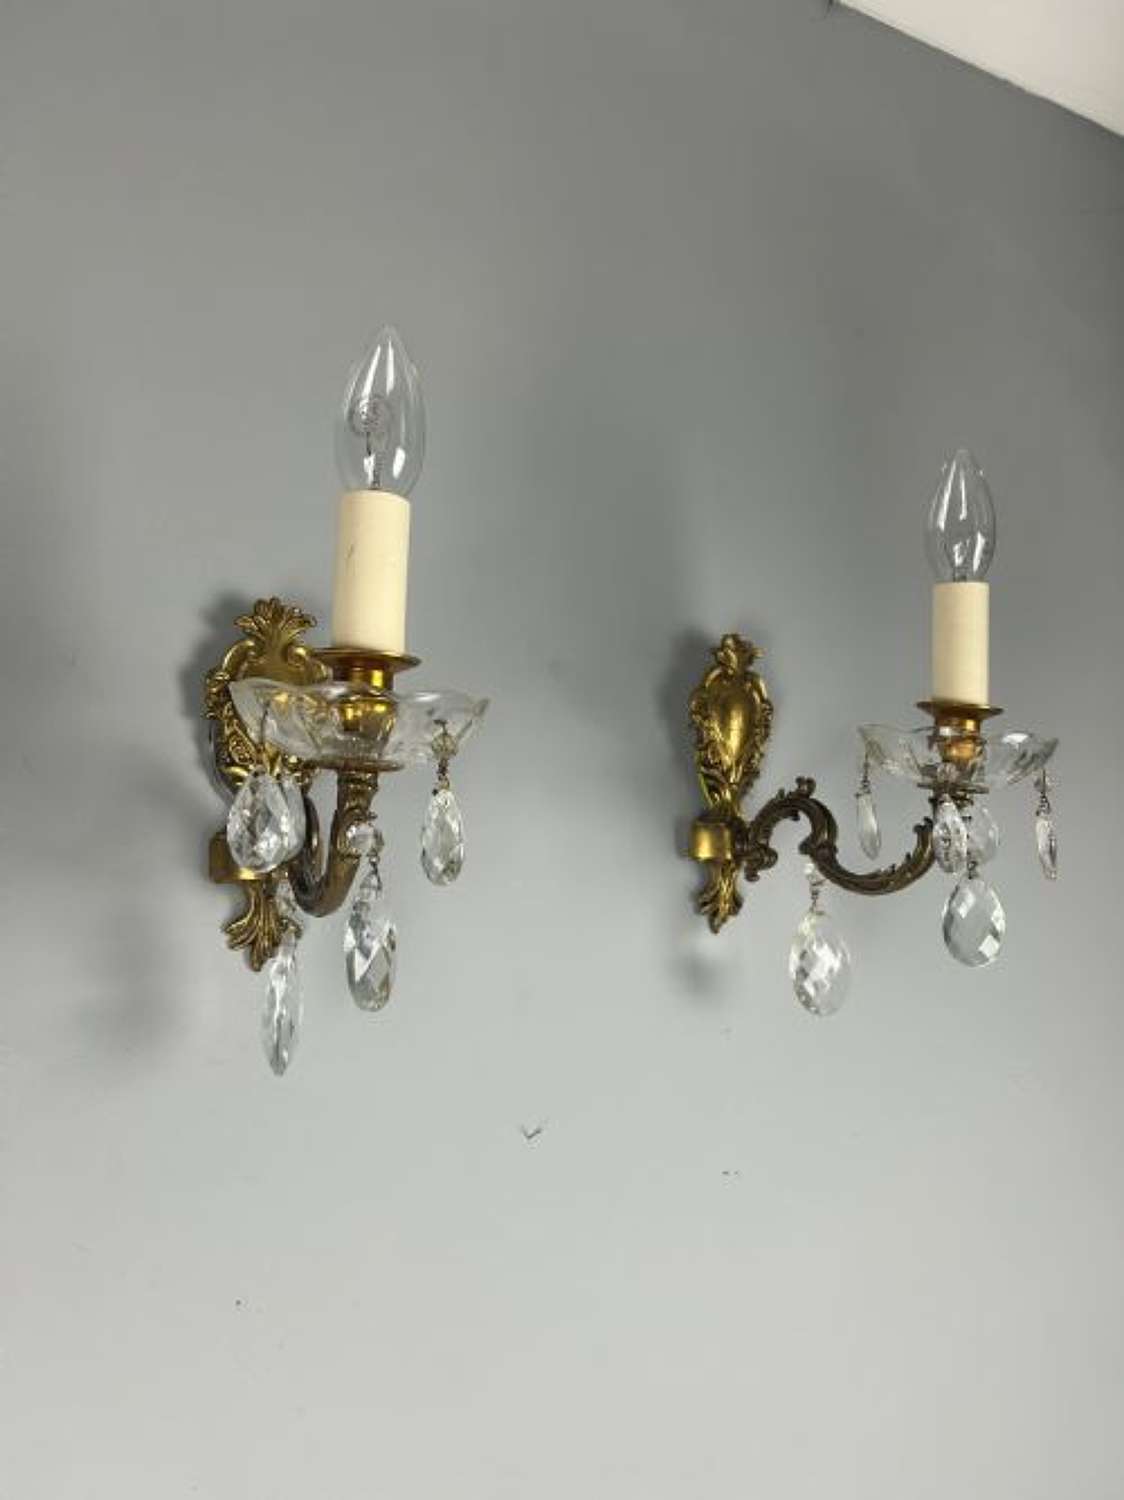 Pair of French Single Arm Brass Antique Wall Lights with Glass Dropper